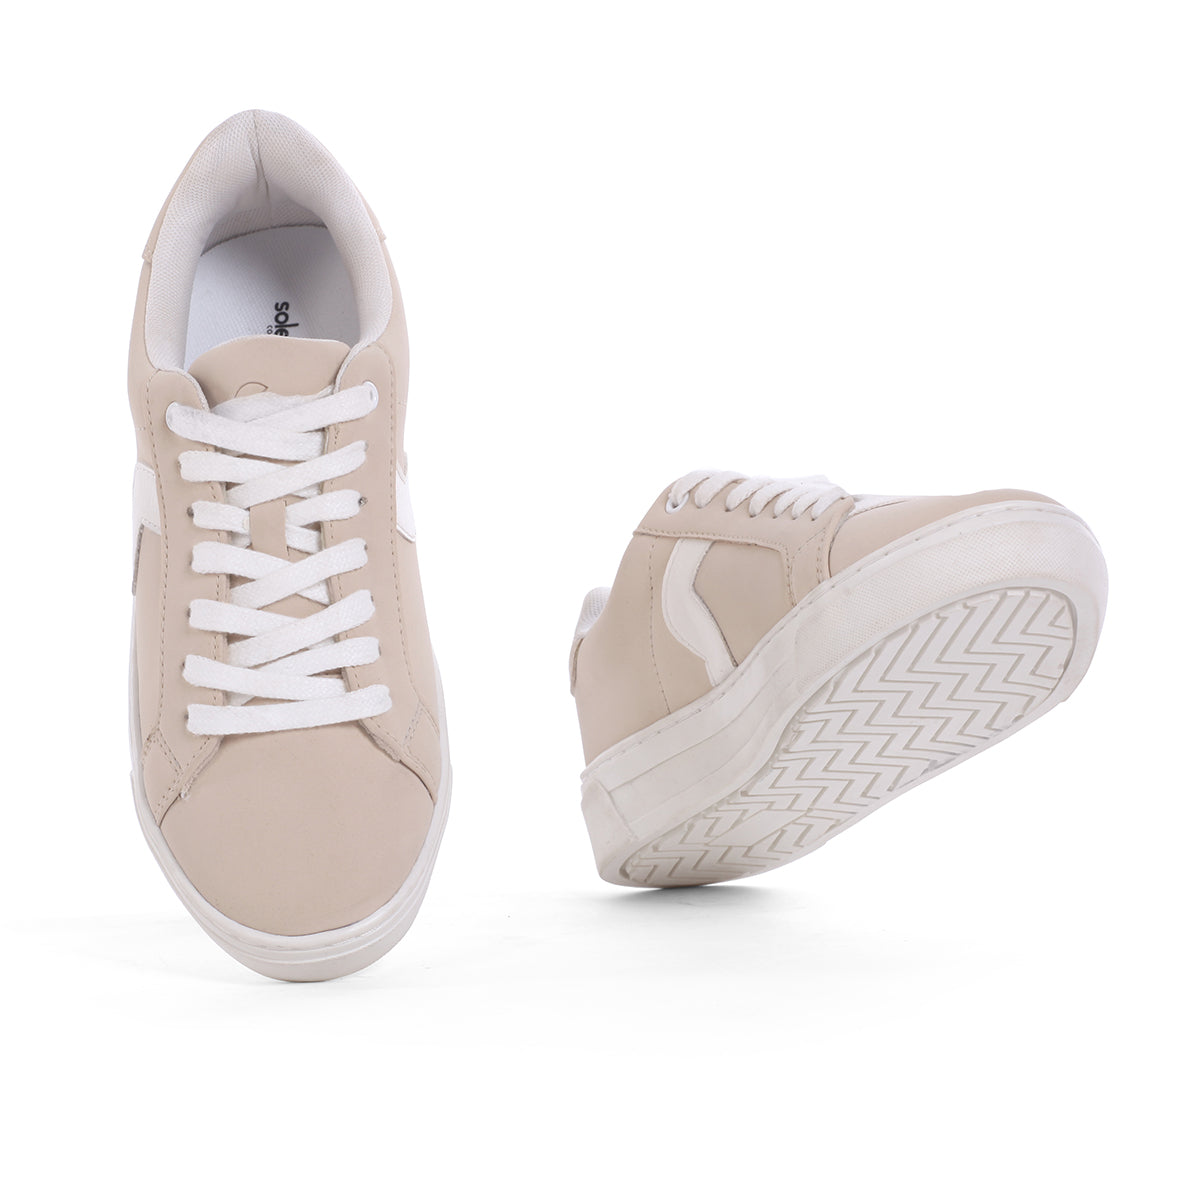 Swatch Sneakers For Women - Solethreads